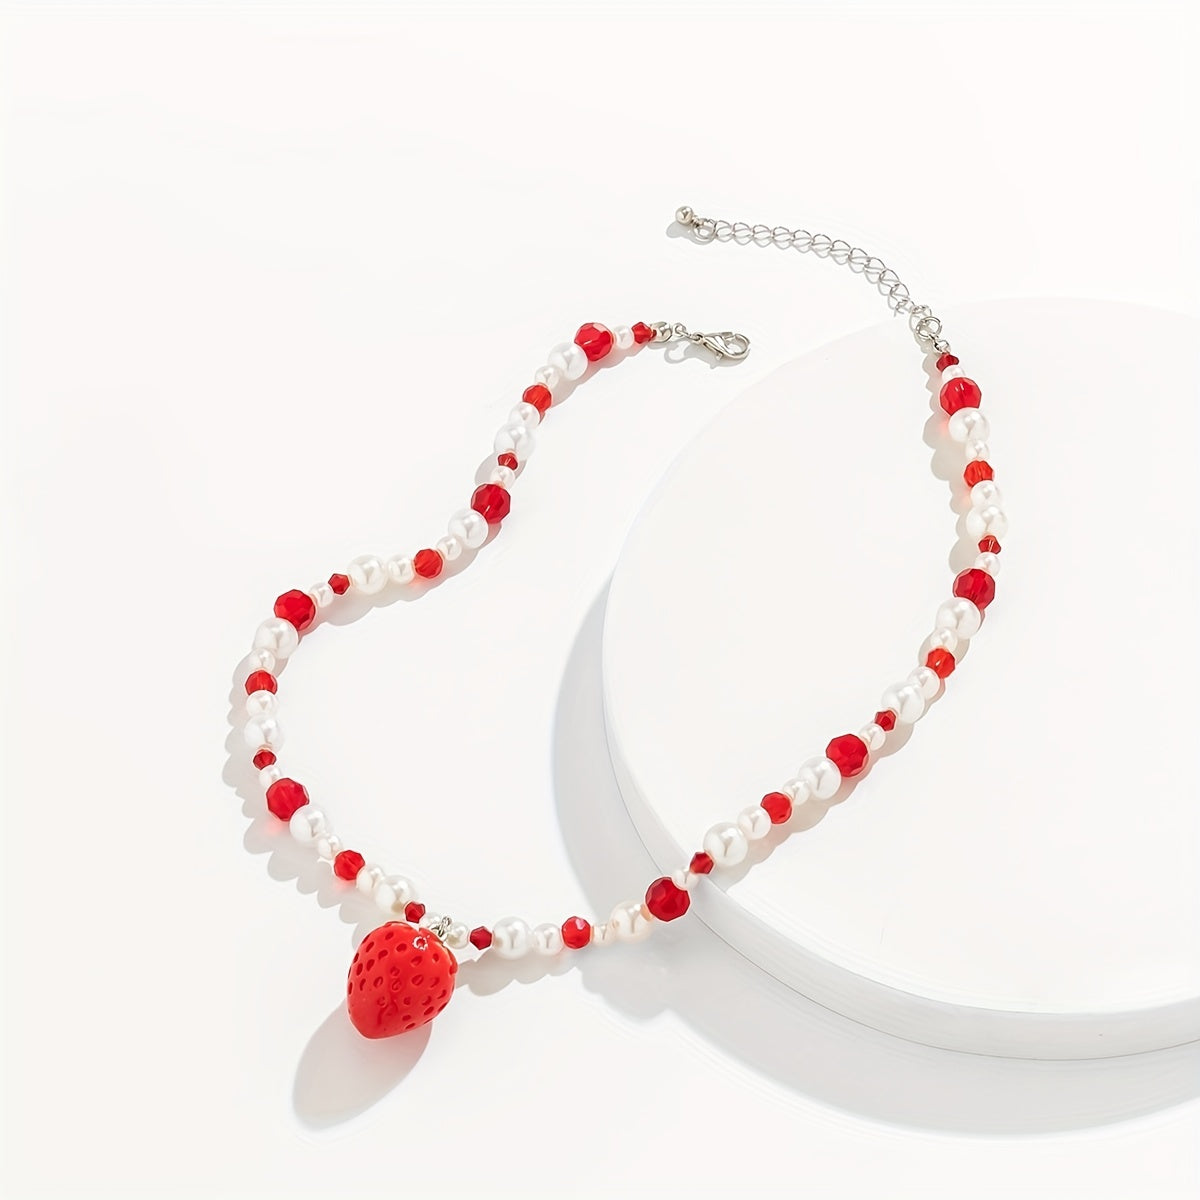 Strawberry Pendant Necklace With Faux Pearl Crystal Beads, Cute Fruit Design Gift Accessories Ornament